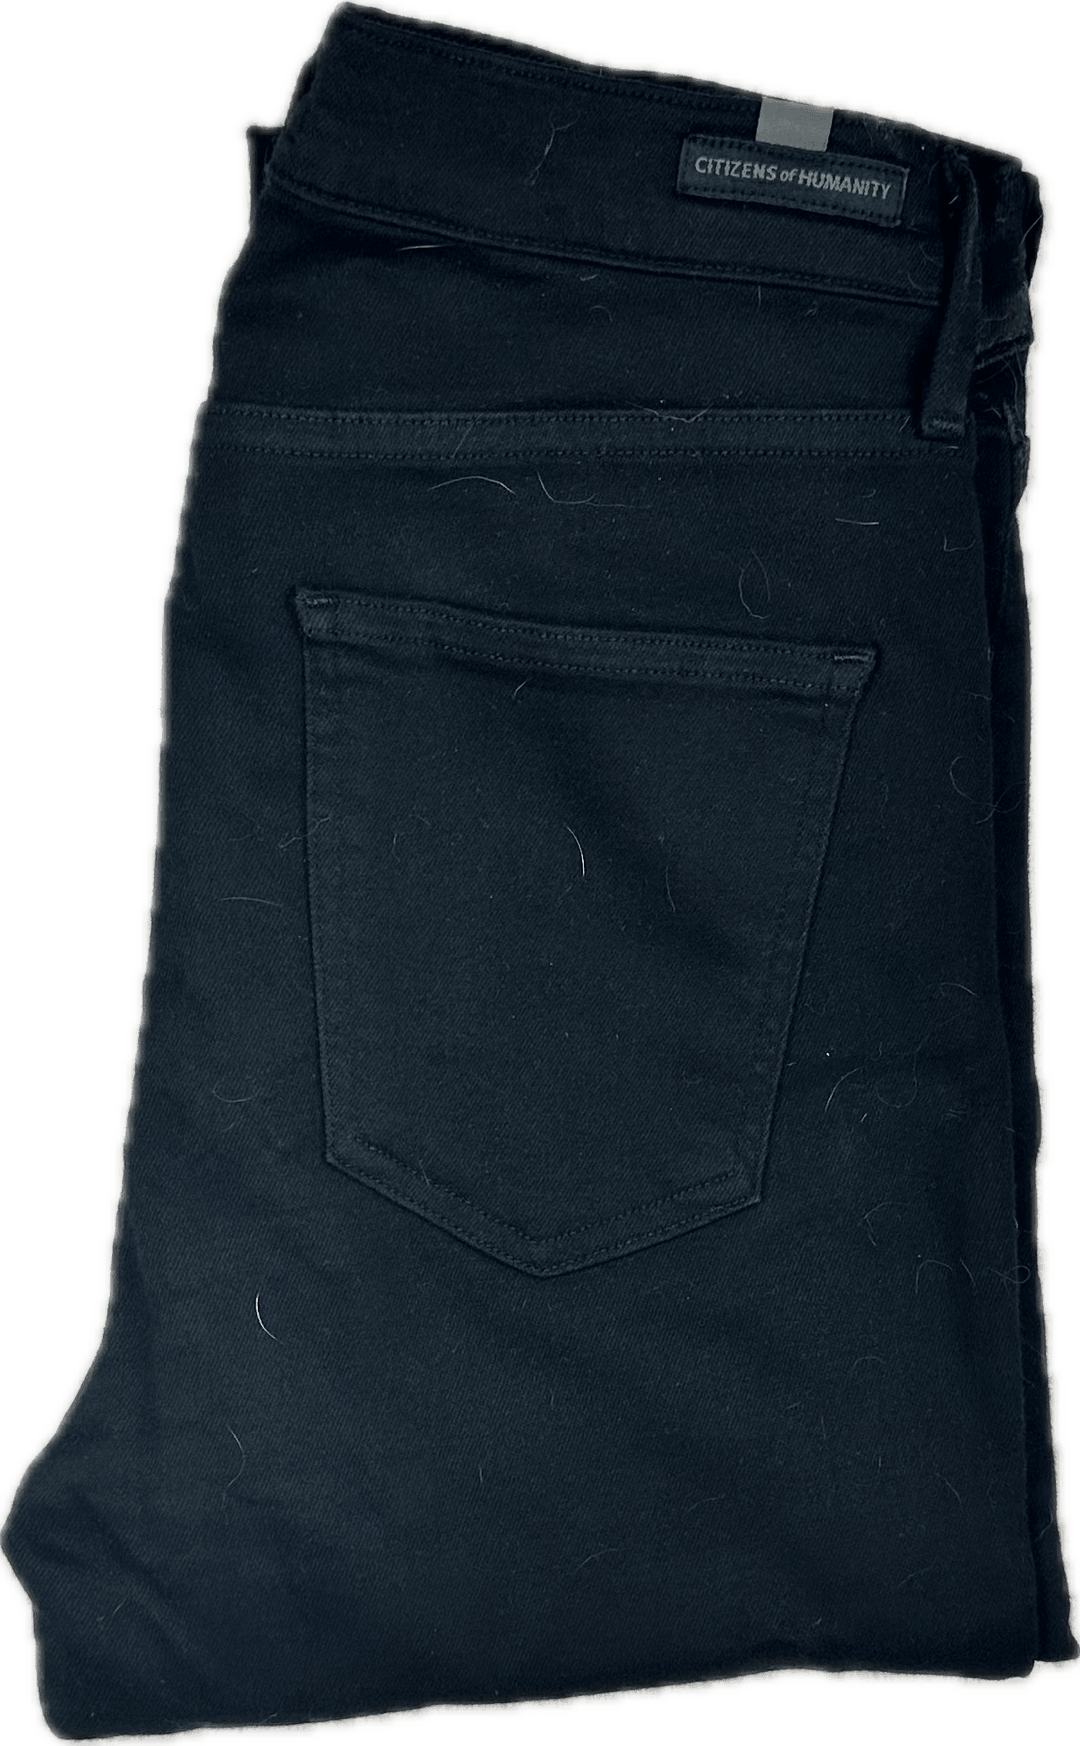 Citizens of Humanity 'Rocket' High Rise Black Skinny Jeans - Size 27 - Jean Pool